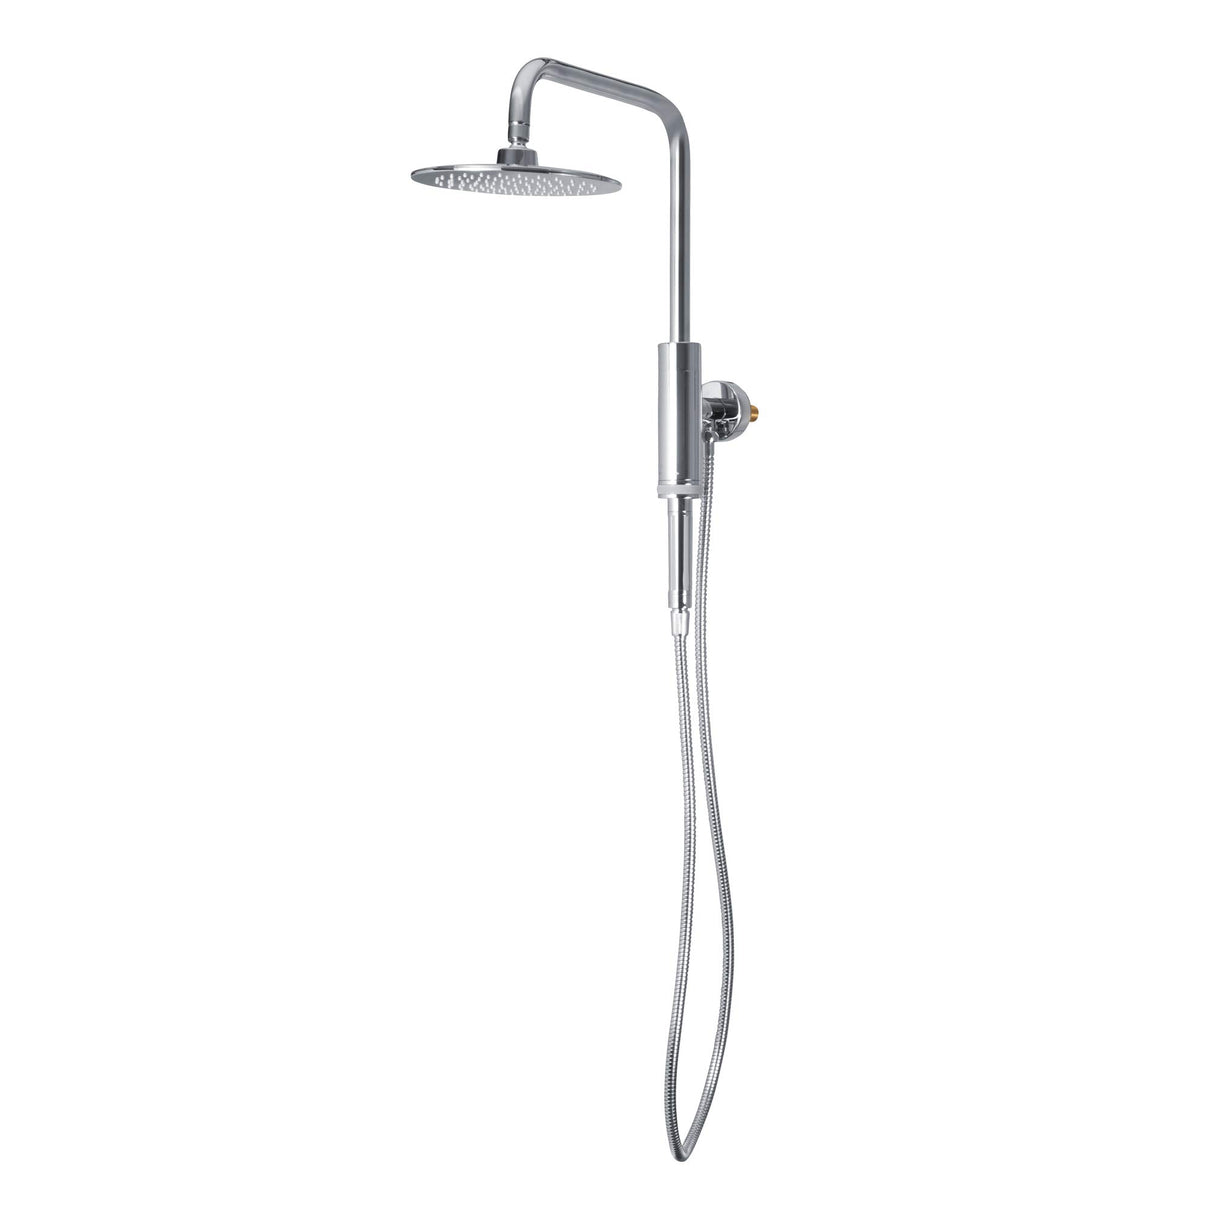 PULSE ShowerSpas 1052-CH-1.8GPM Aquarius Shower System with 8" Rain Showerhead and Magnetic Attached Hand Shower with On/Off, Polished Chrome, 1.8 GPM